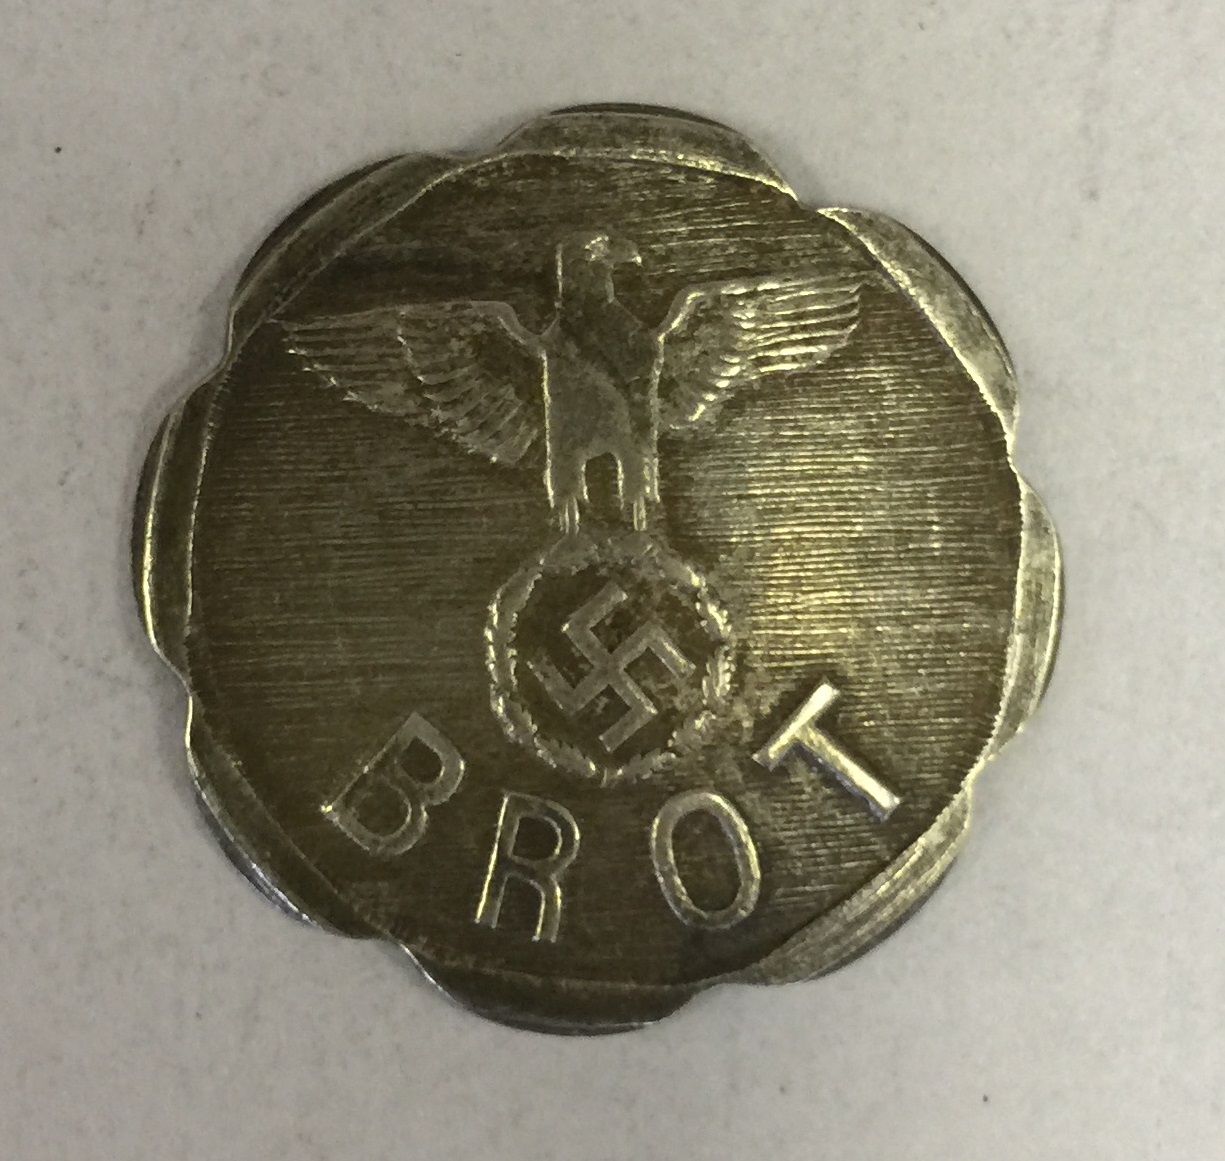 THIRD REICH TOKENS. - Image 3 of 3